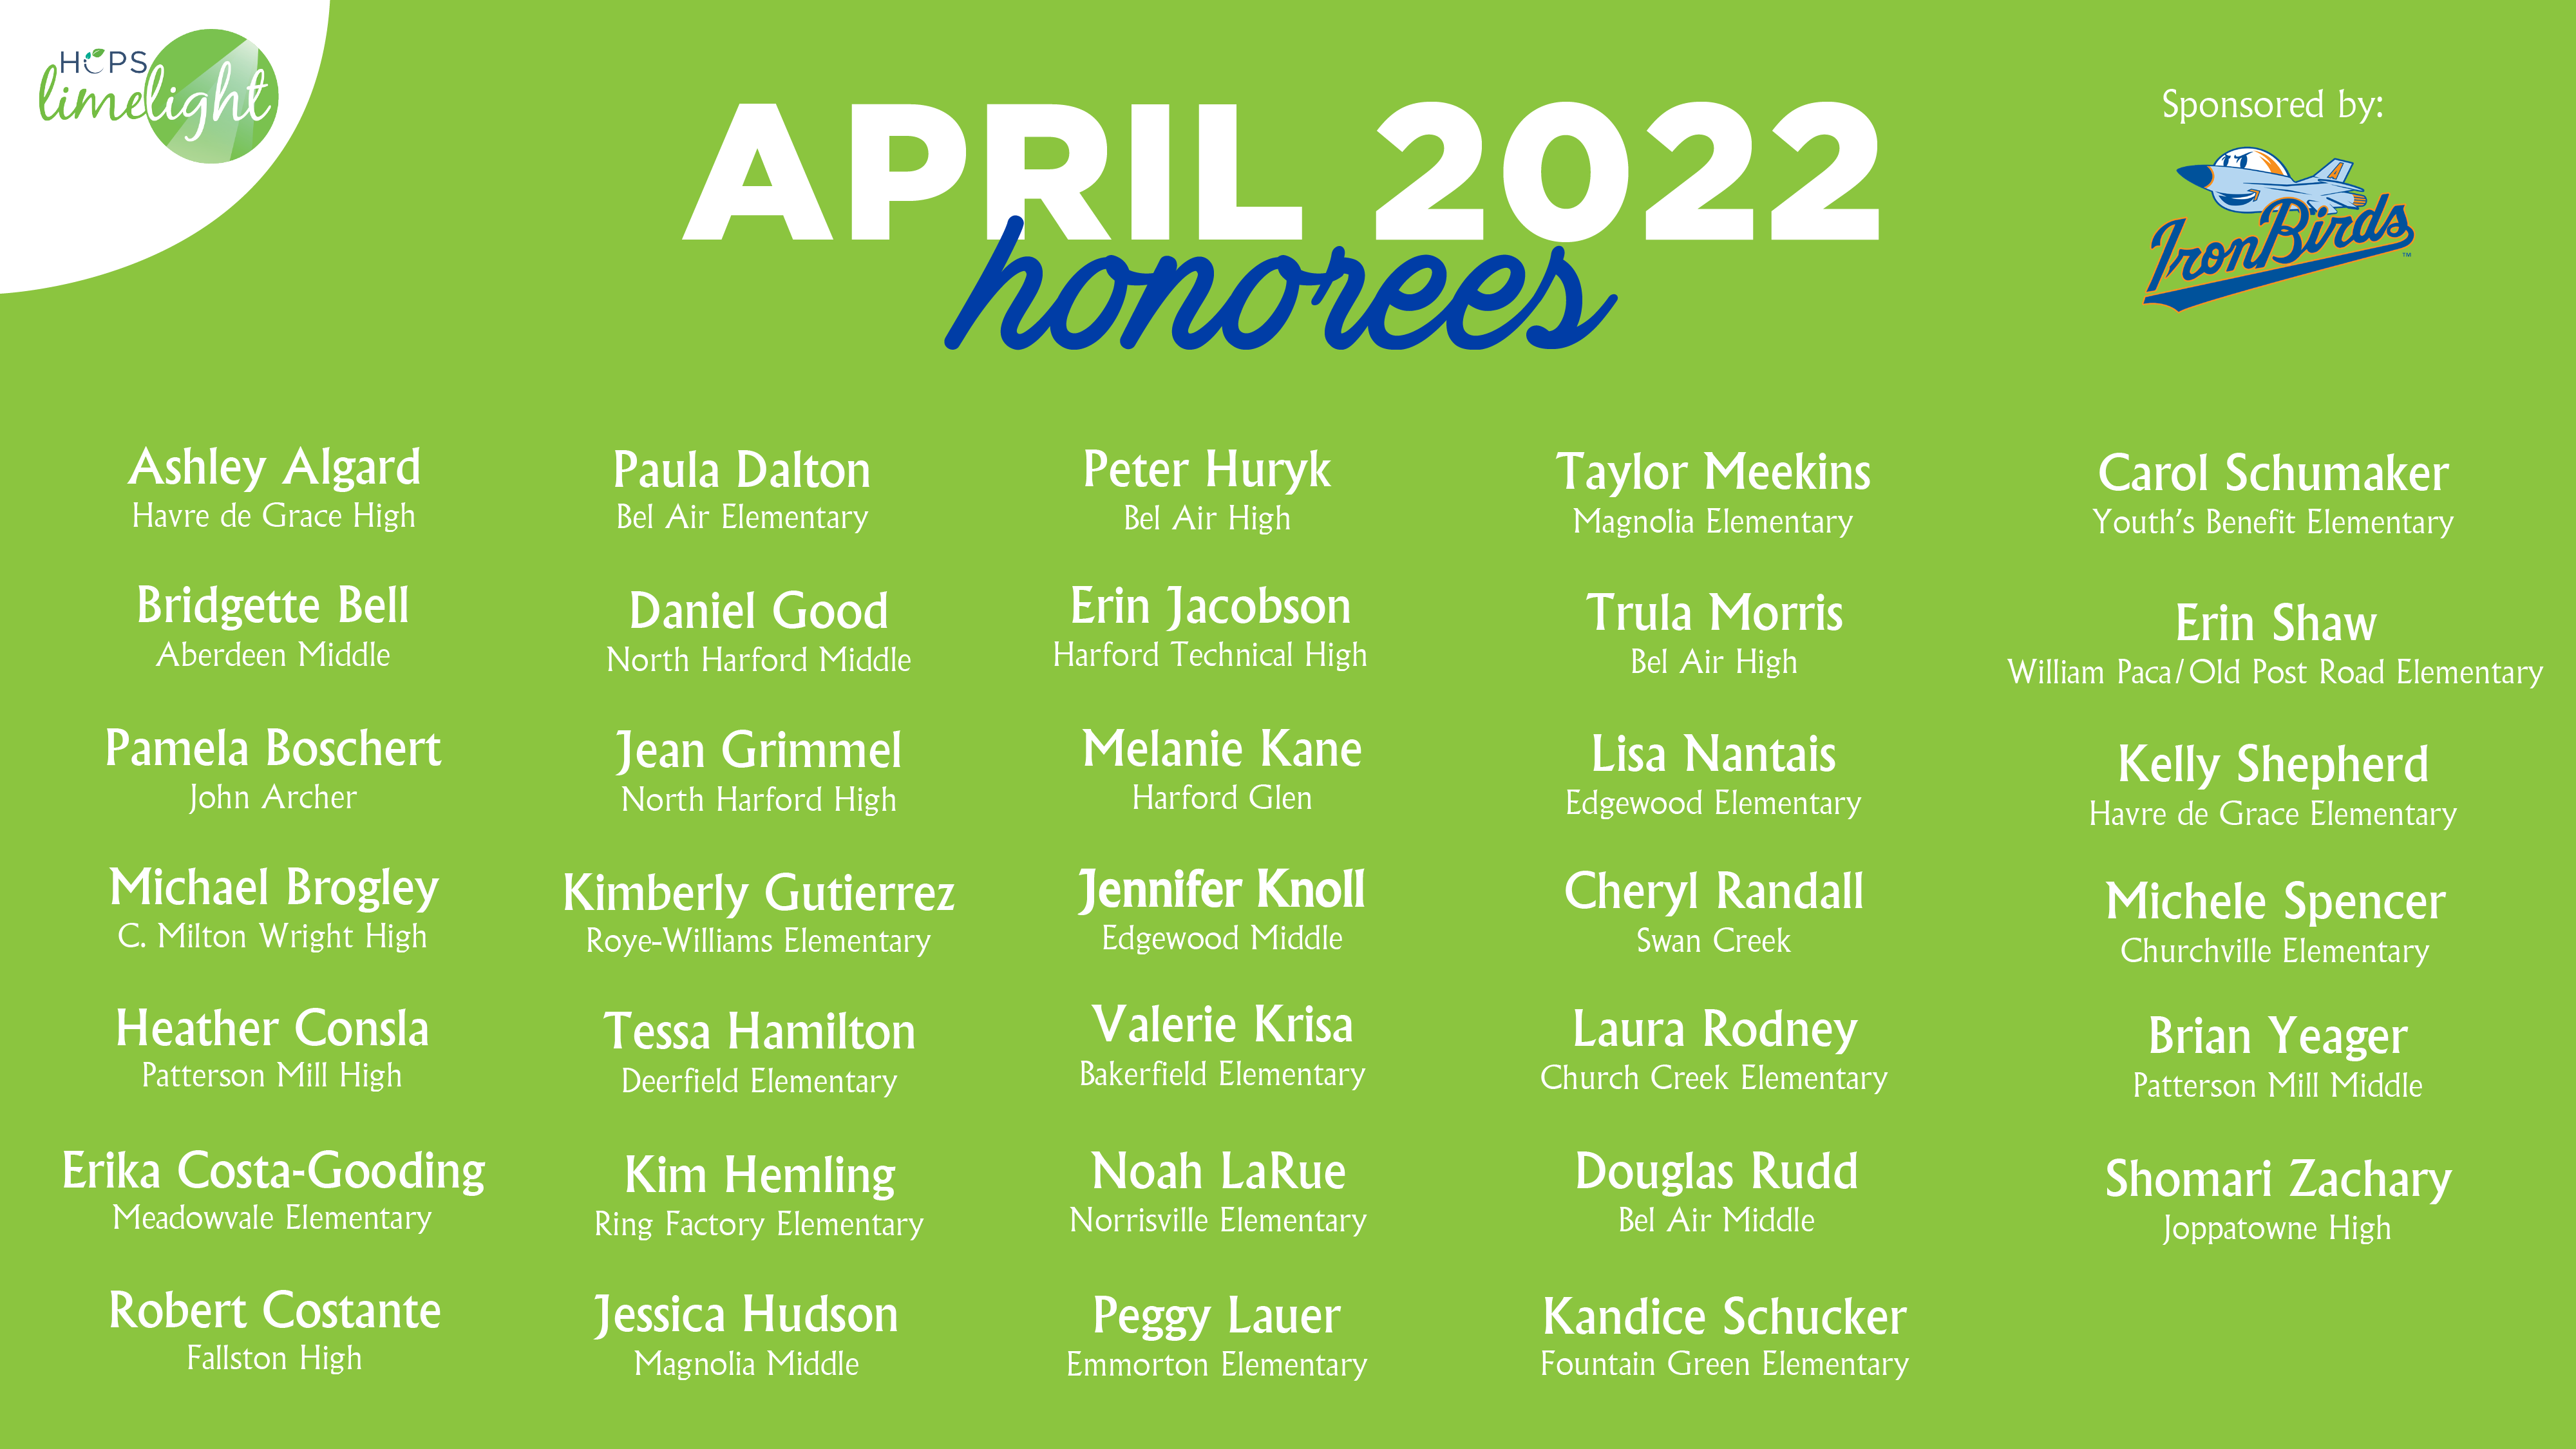 HCPS Limelight Honorees - April 2022